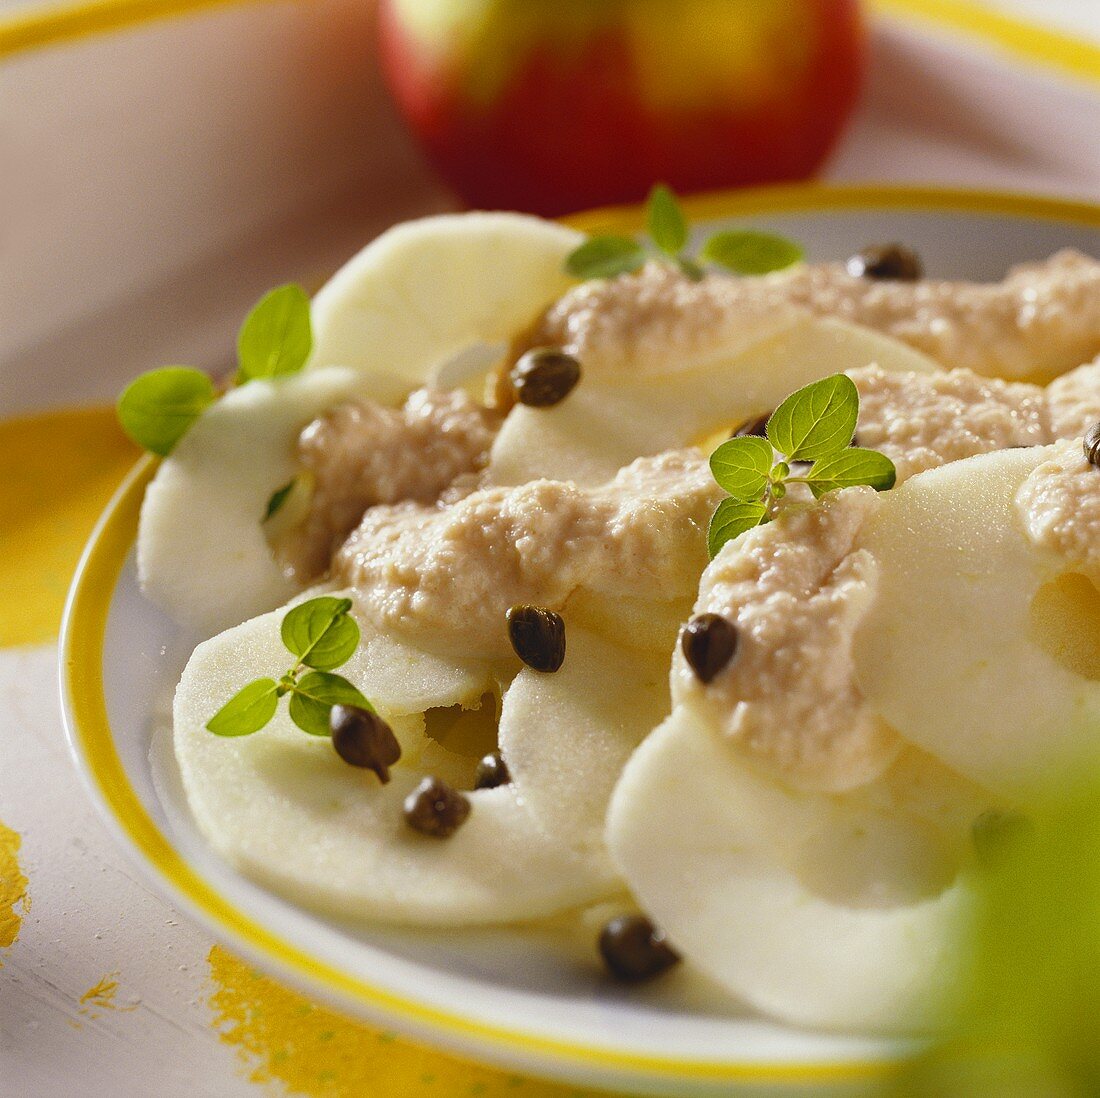 Apple carpaccio with horseradish dressing, capers and herbs